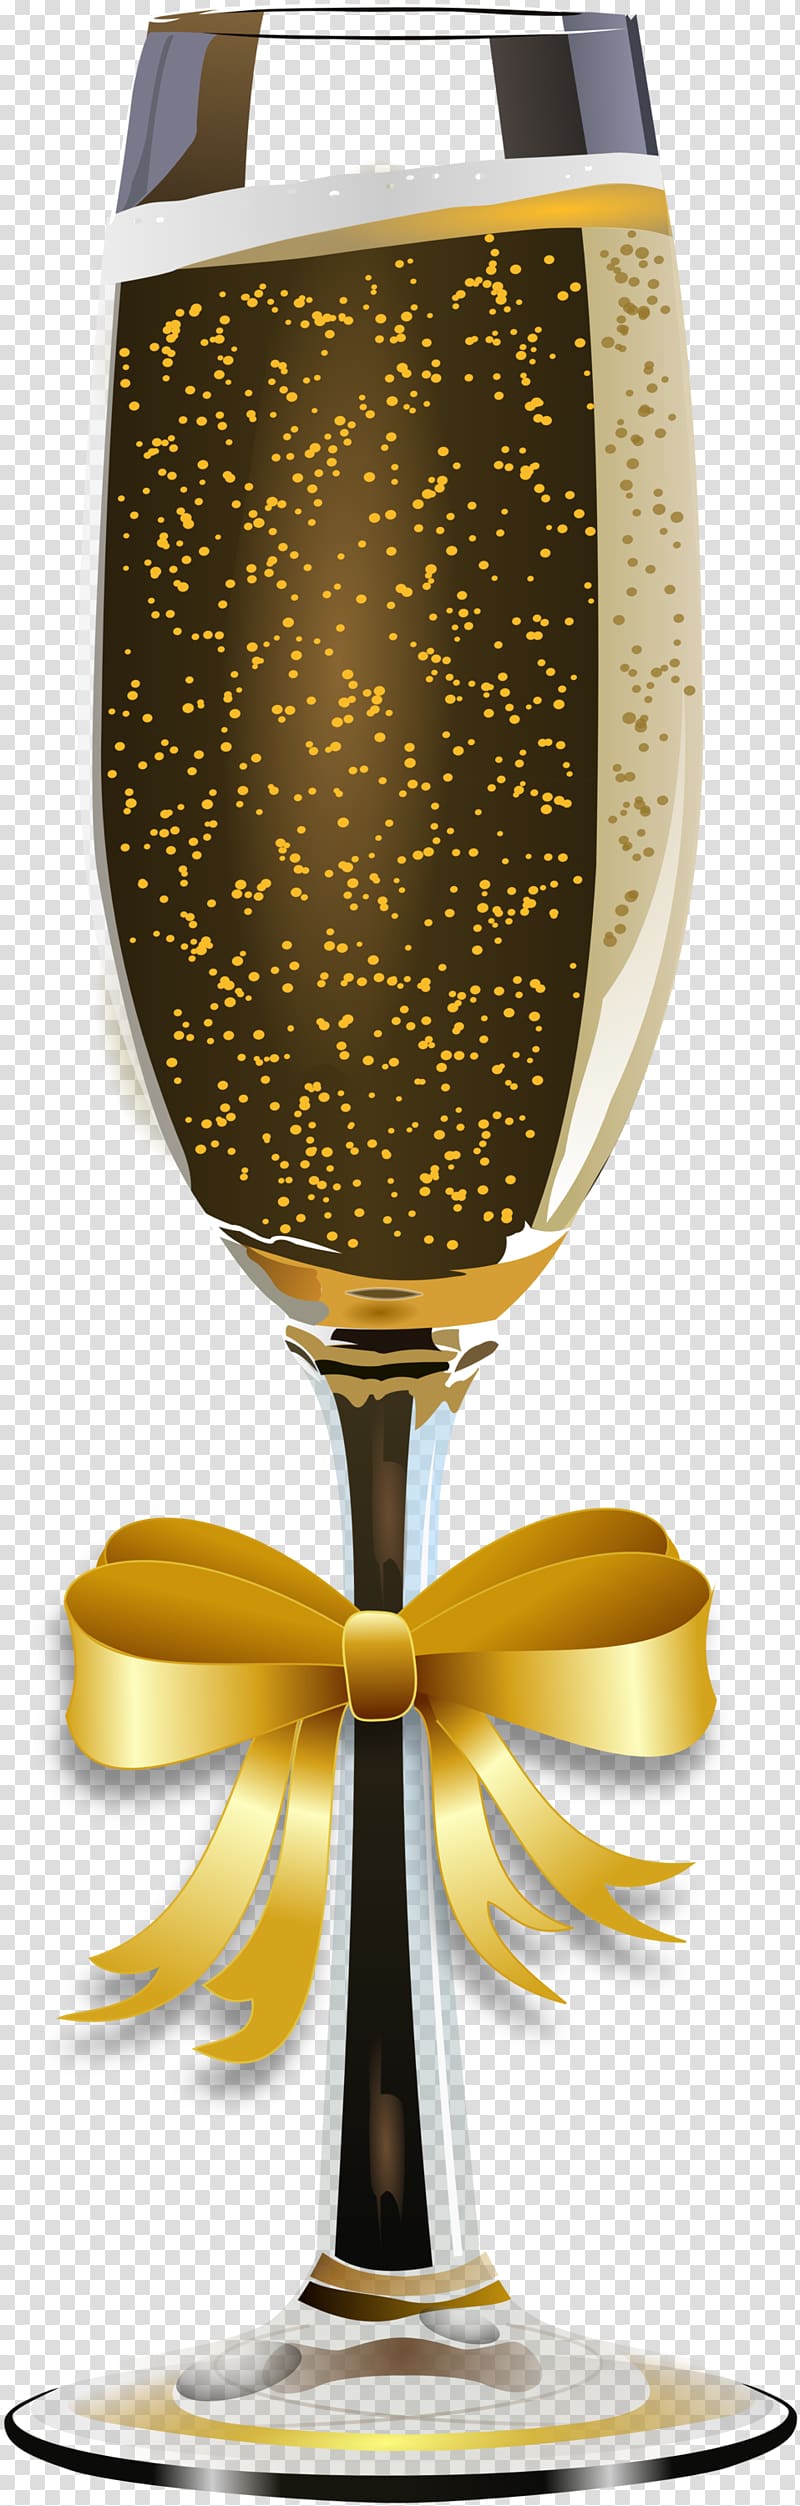 Champagne glass Beer , Wineglass transparent background PNG clipart